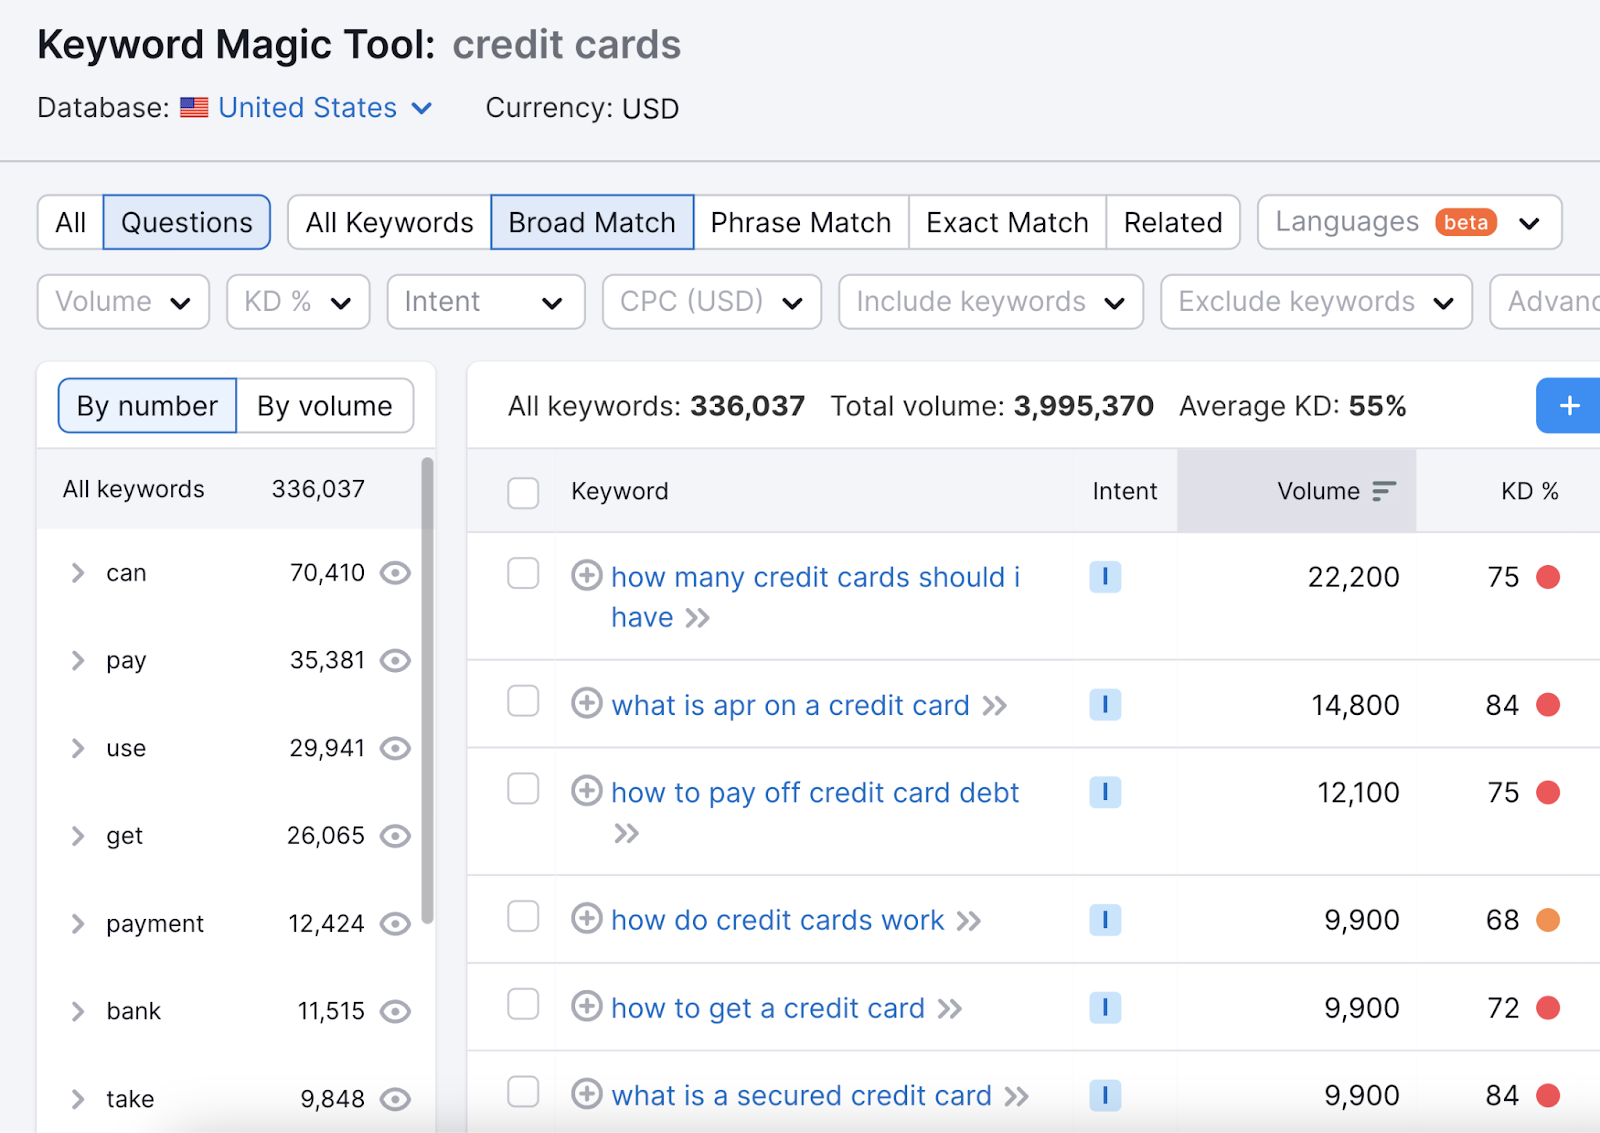 Questions keywords related to "credit card" shown in Keyword Magic Tool